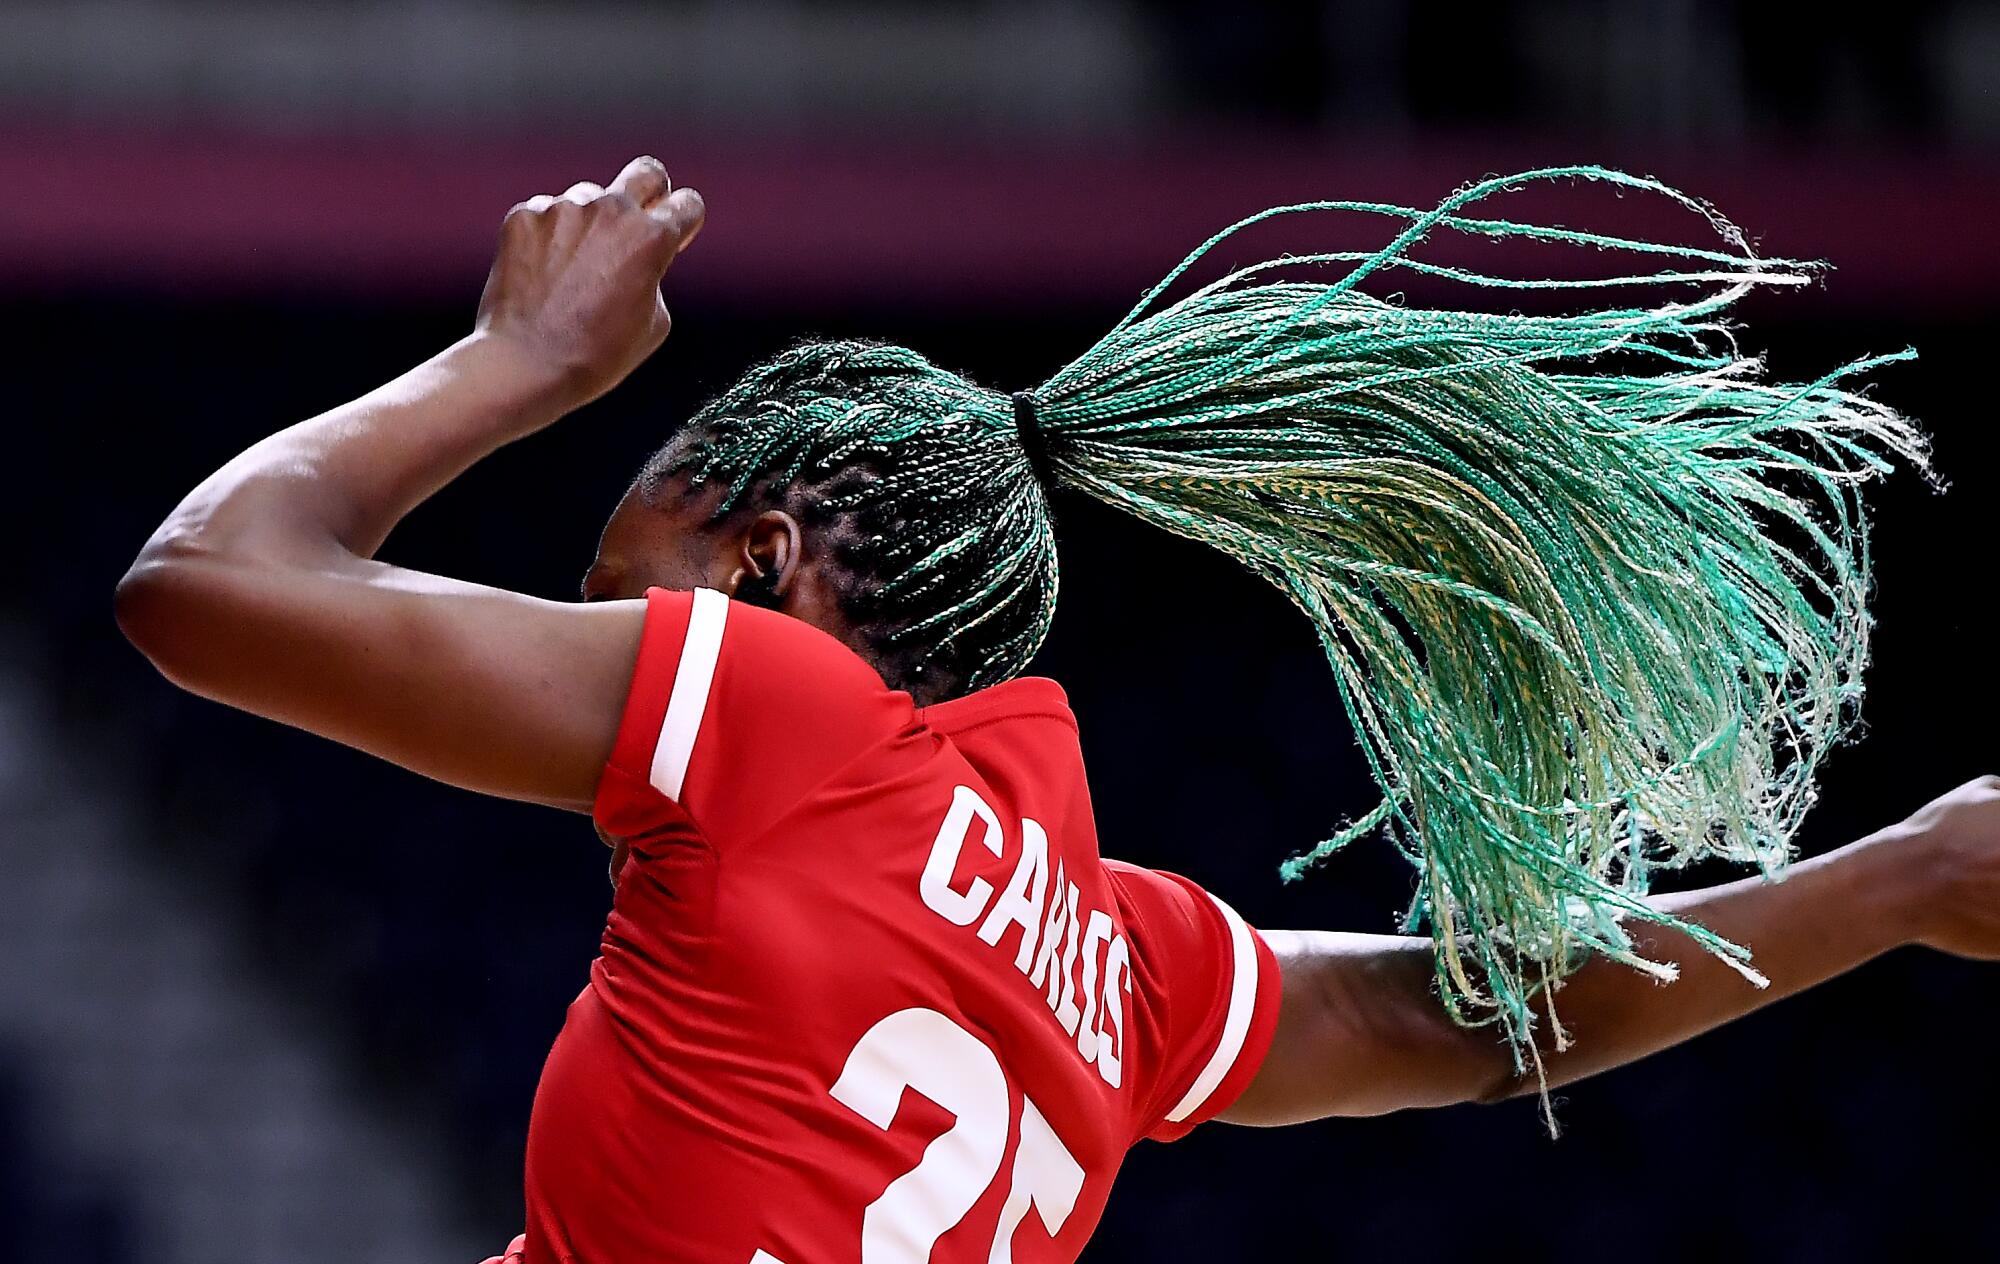 The hair of Angola's Azenaide Carlos flies through the air after taking a shot against Netherlands